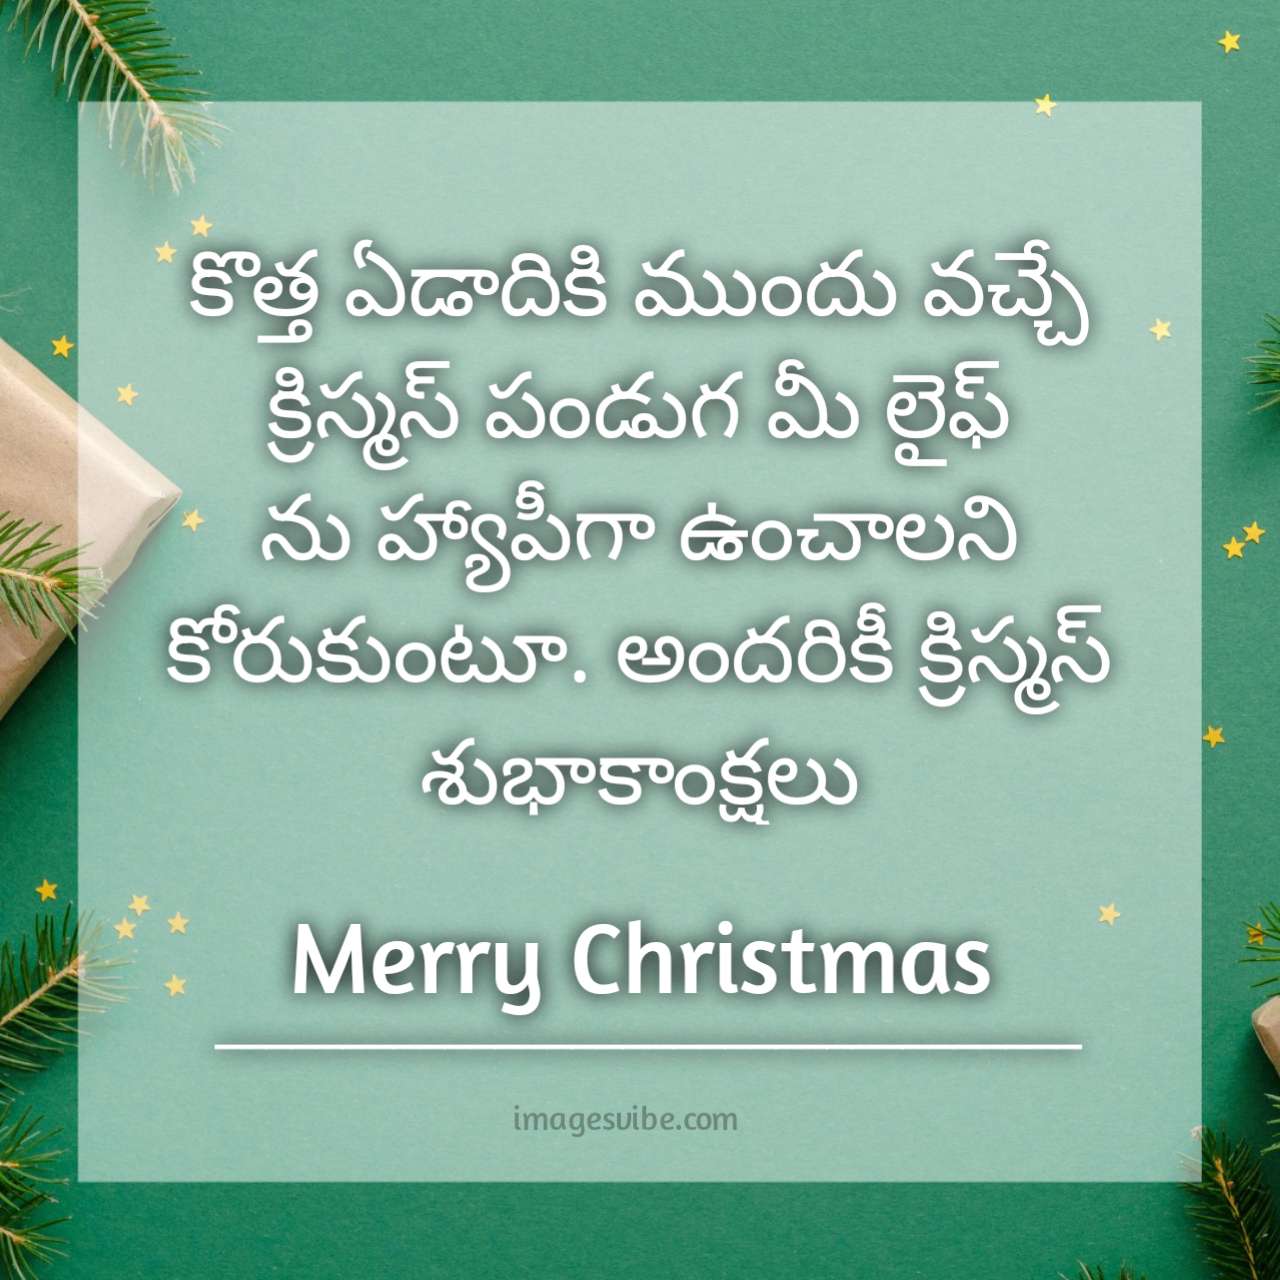 Merry Christmas Images With Quotes In Telugu